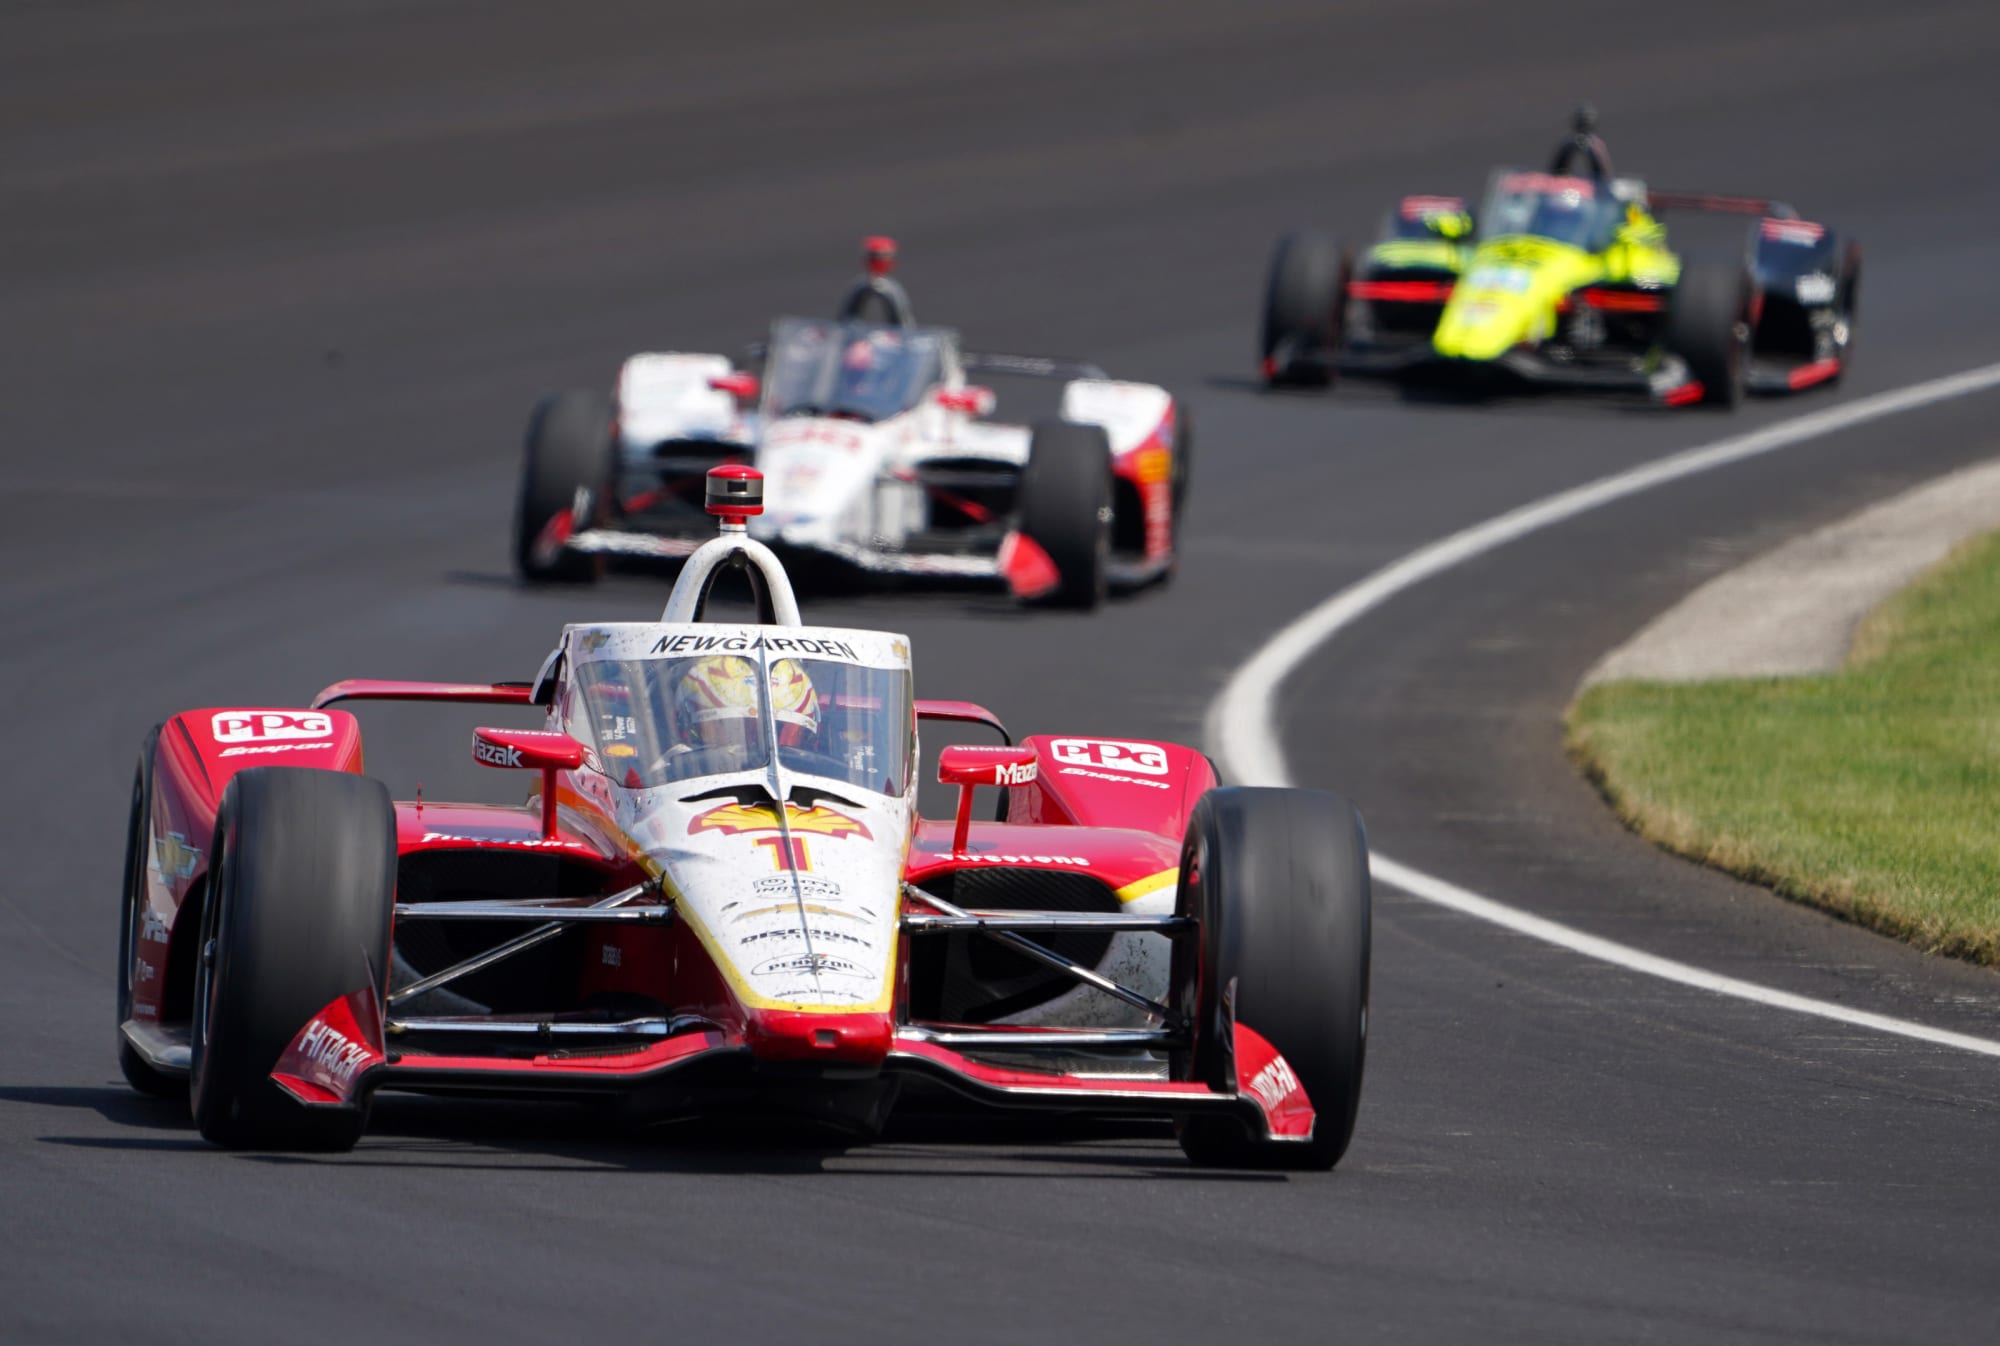 IndyCar The 2021 Indy 500 has hit the magic number...